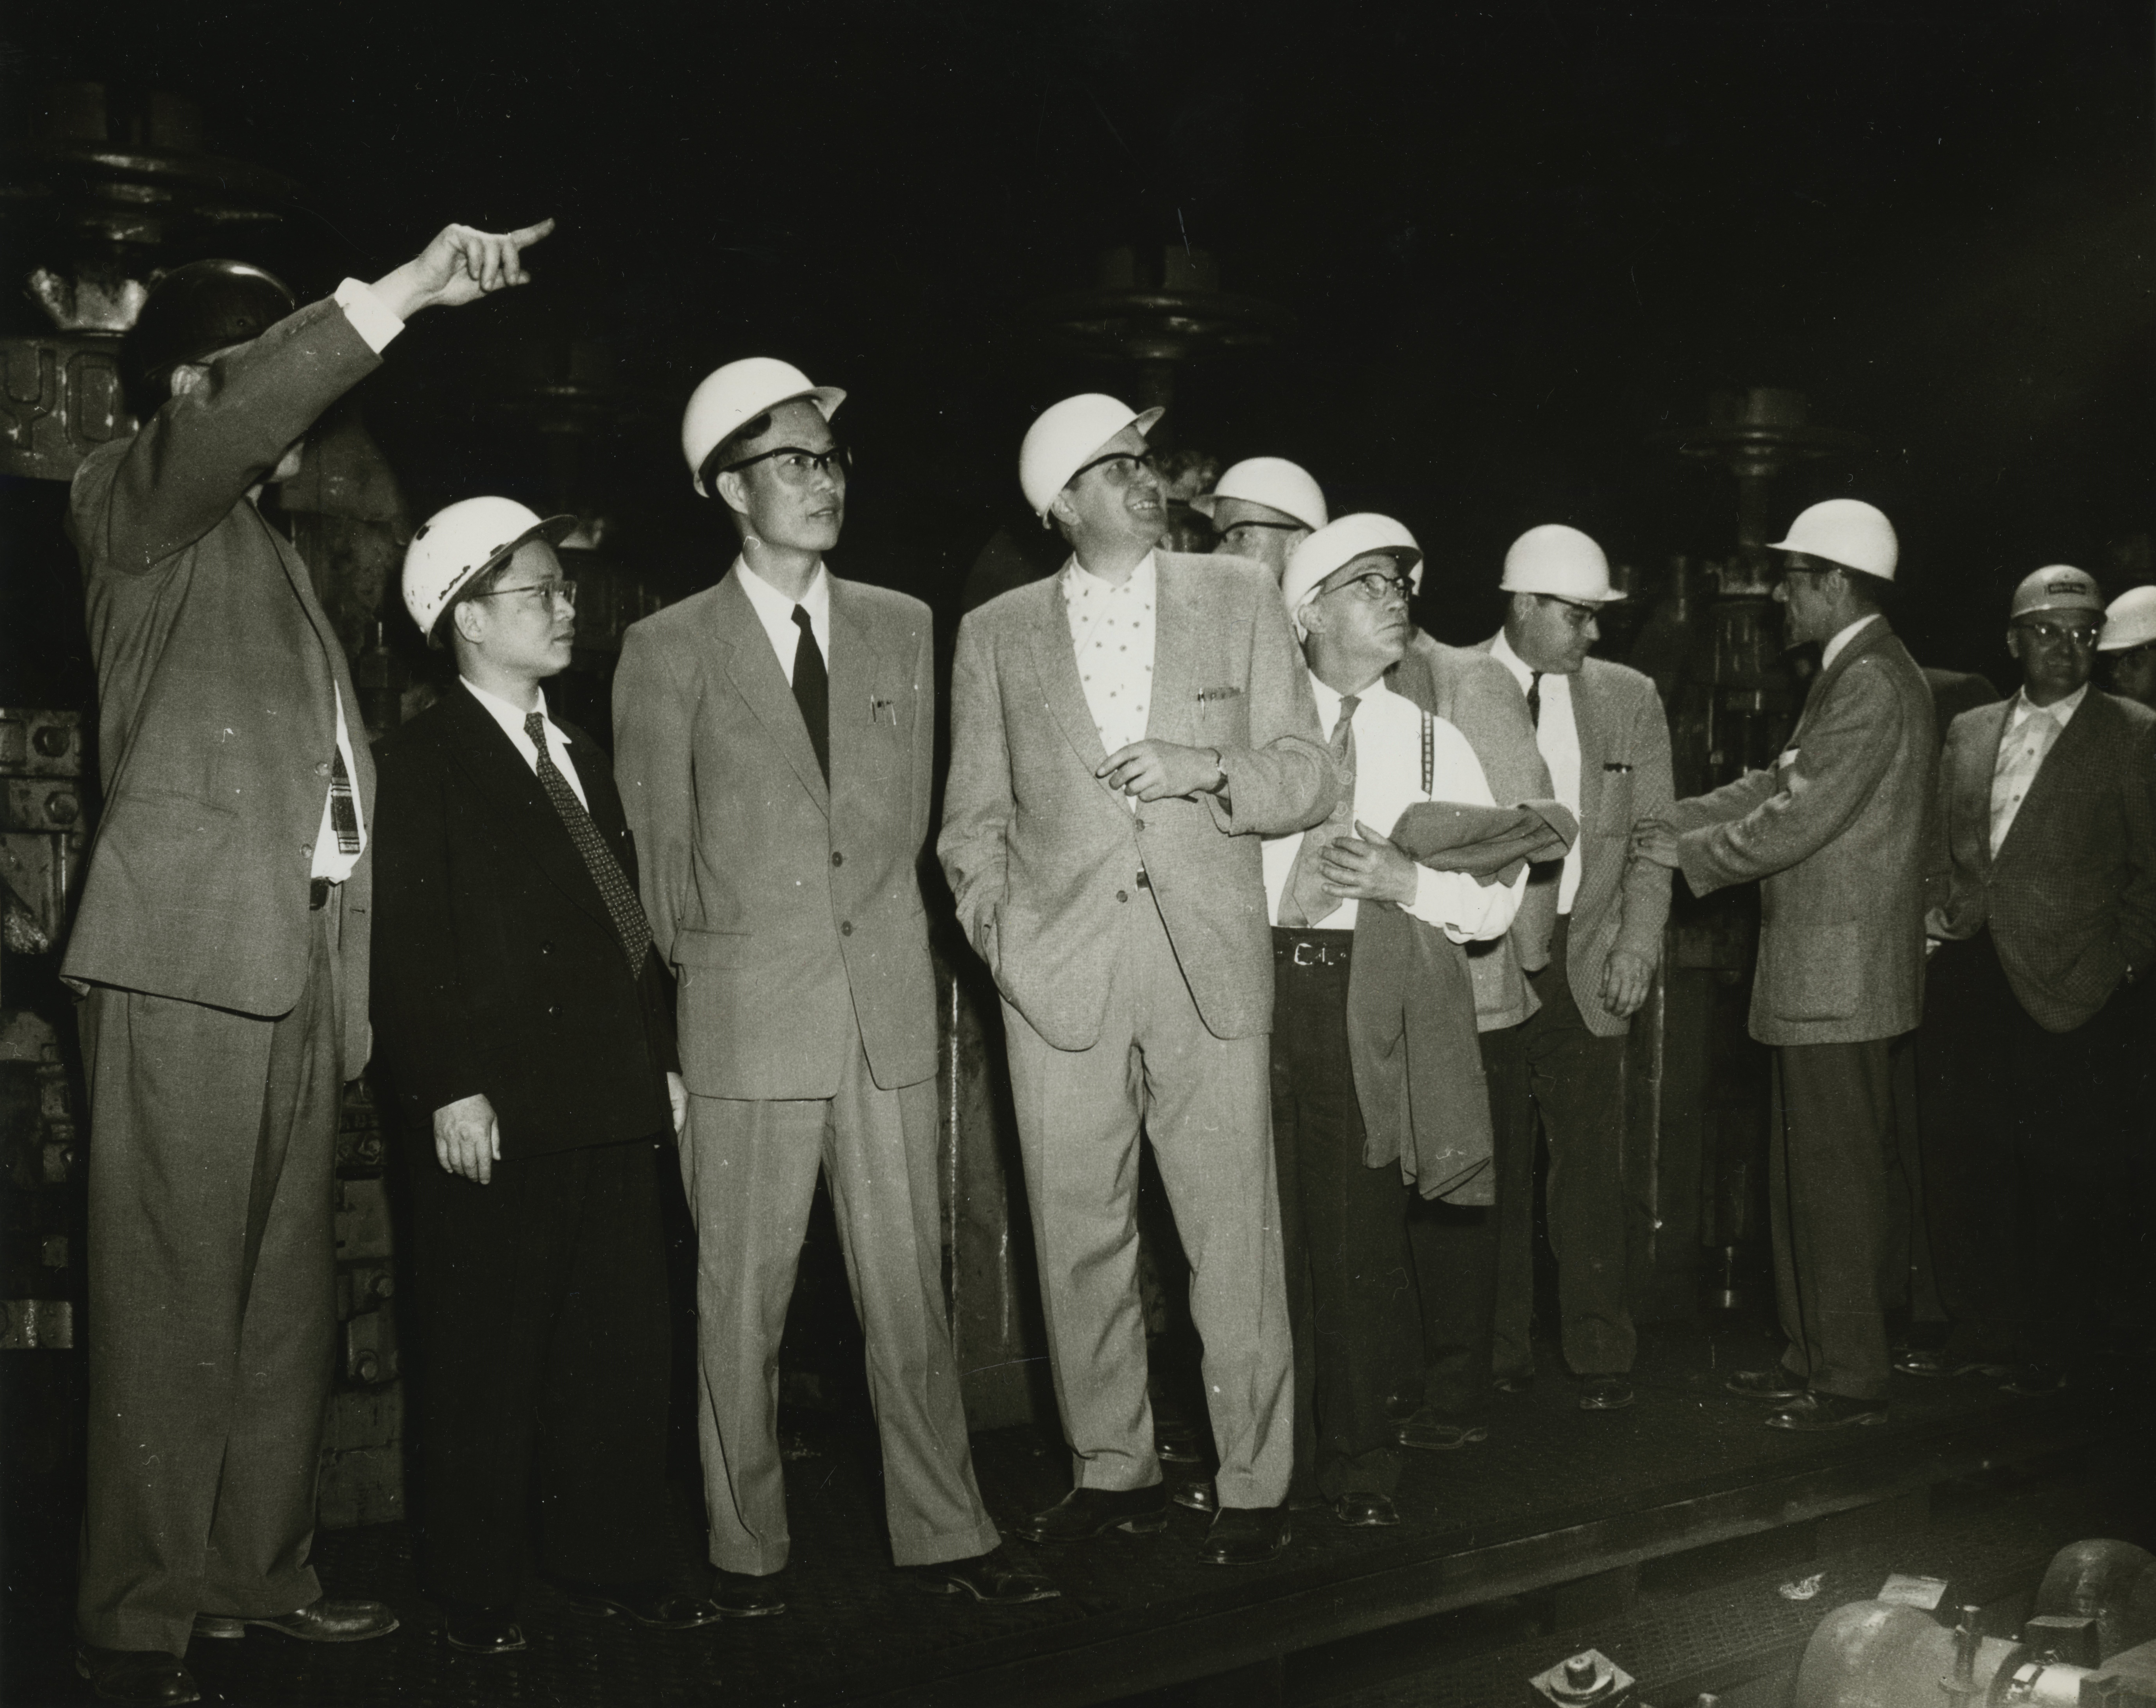 Men in suits and hard hats look in the direction another man is pointing.